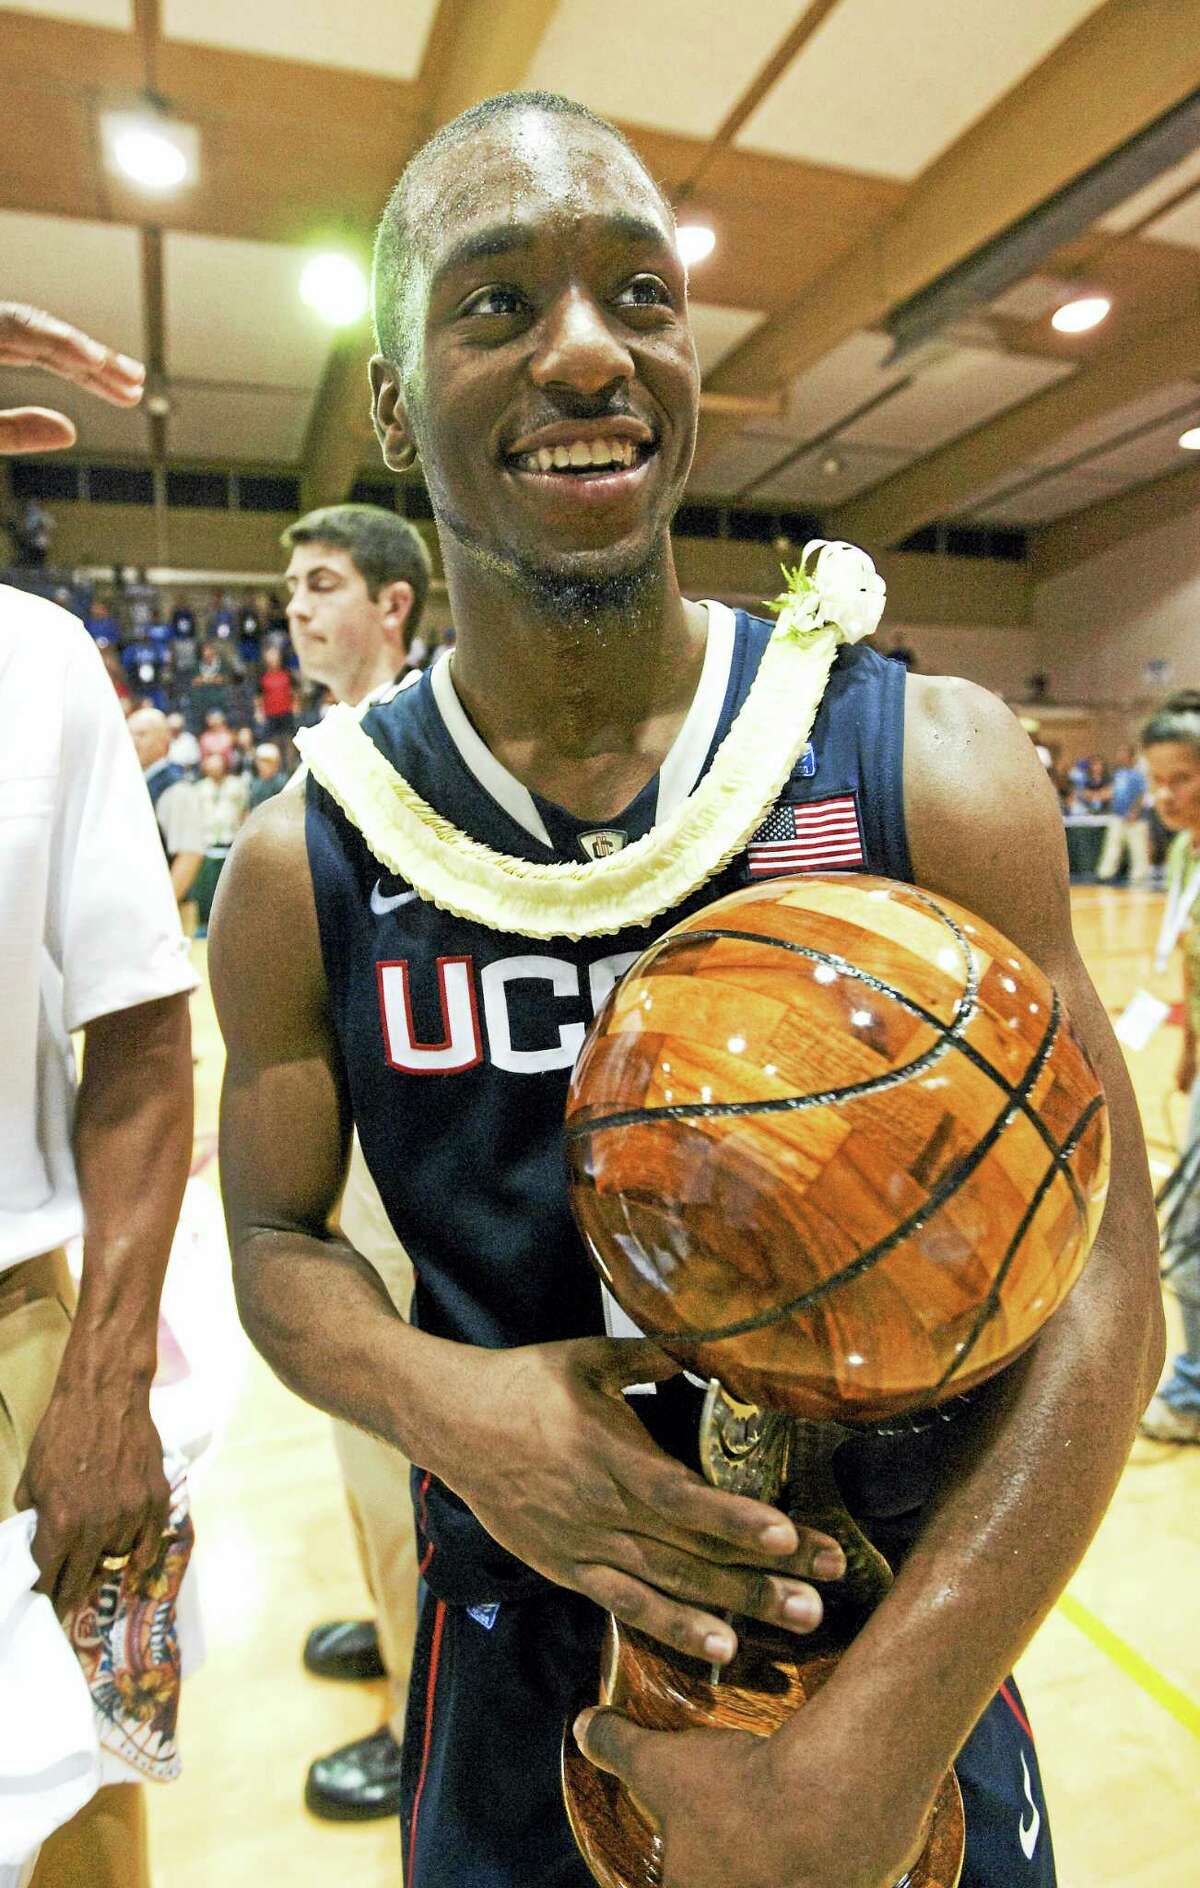 UConn guard Kemba Walker shows off his trophy as the tournament’s MVP after the Huskies defeated Kentucky to win the 2010 Maui Invitational.